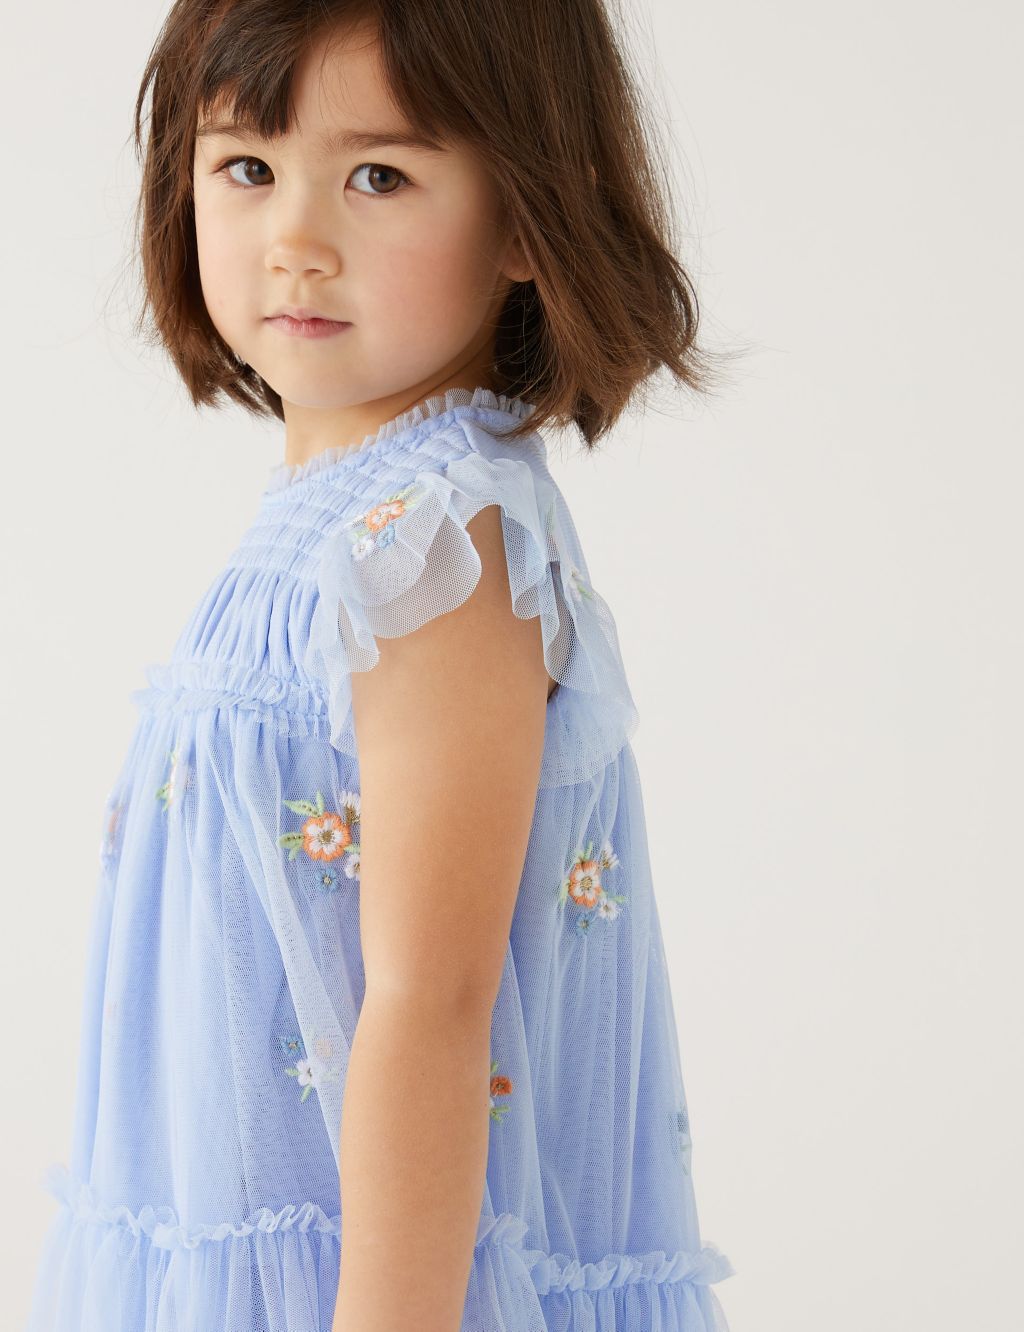 Floral Embroidered Dress (2-8 Yrs) image 2